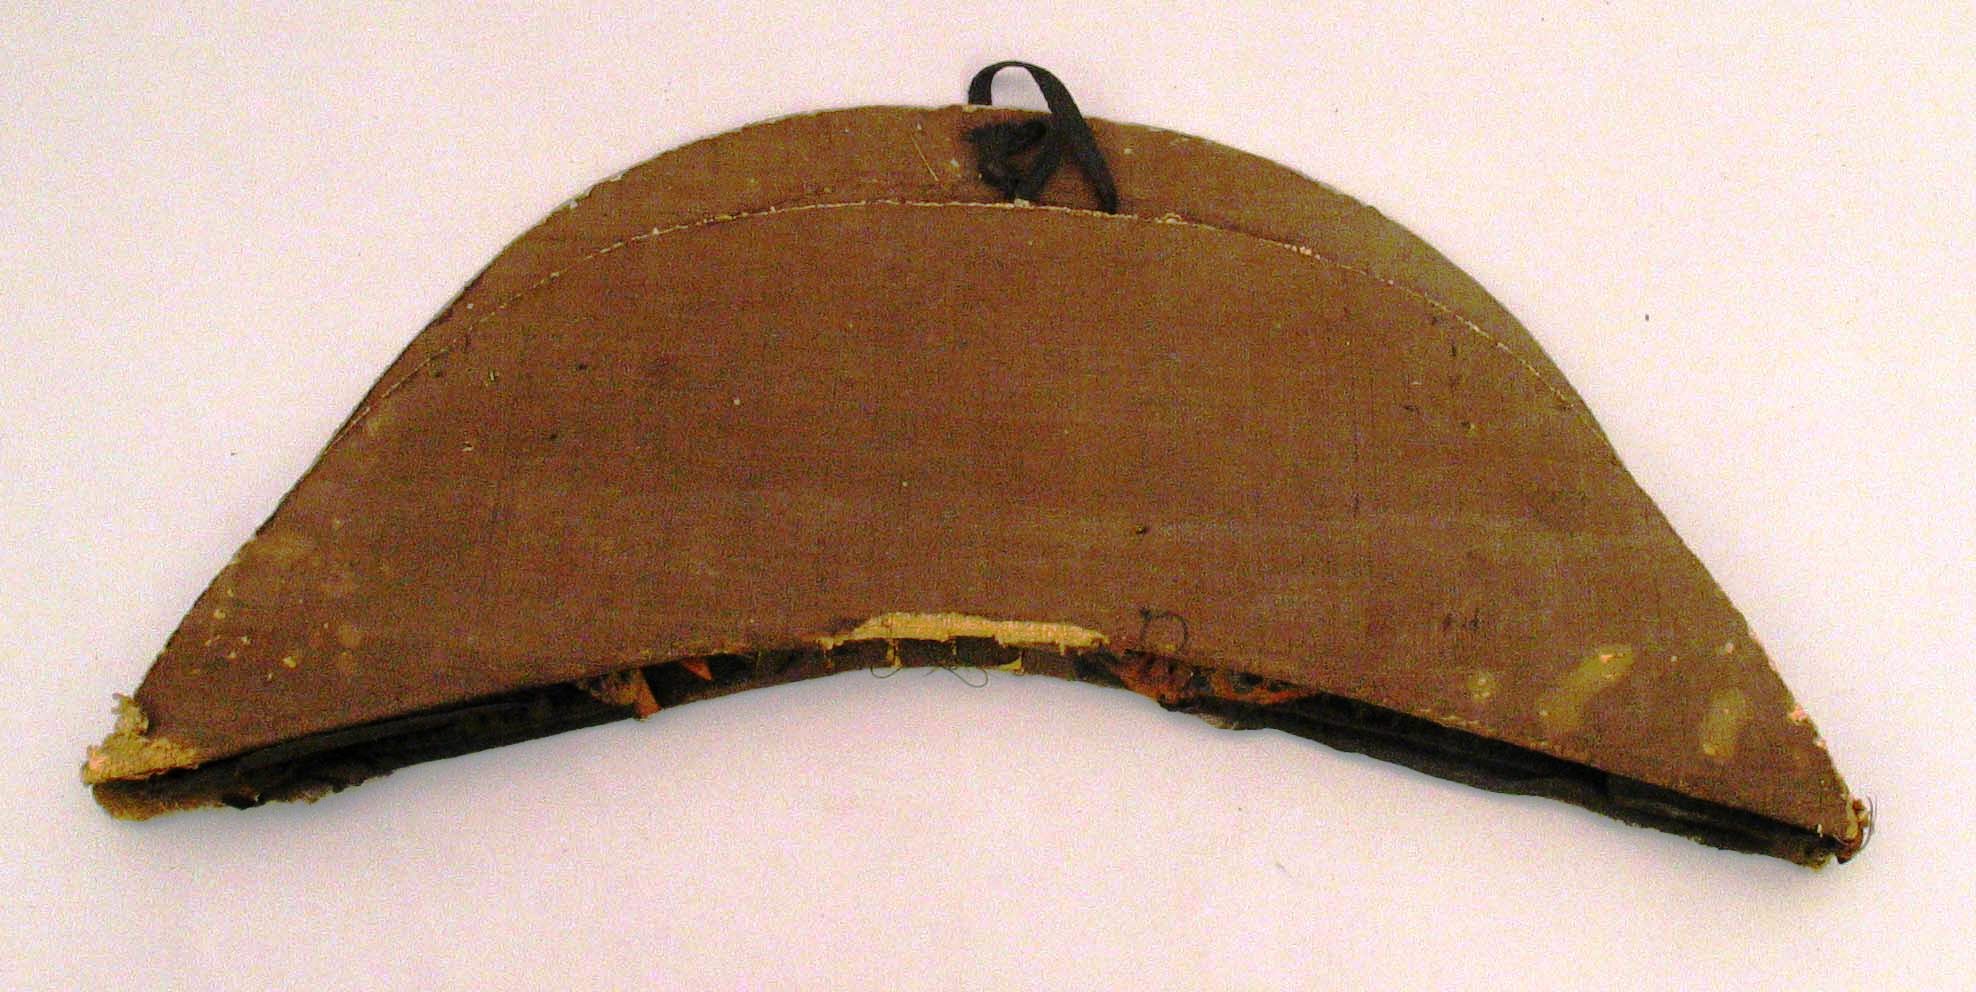 Cocked hat or chapeau bras owned by LT Pardon Mawney Whipple, about 1820. It has seen better days. Made of silk plush over buckram, the it is now stripped of its decorative binding, gilt lace loop, button, and cockade. USS Constitution Museum collection.